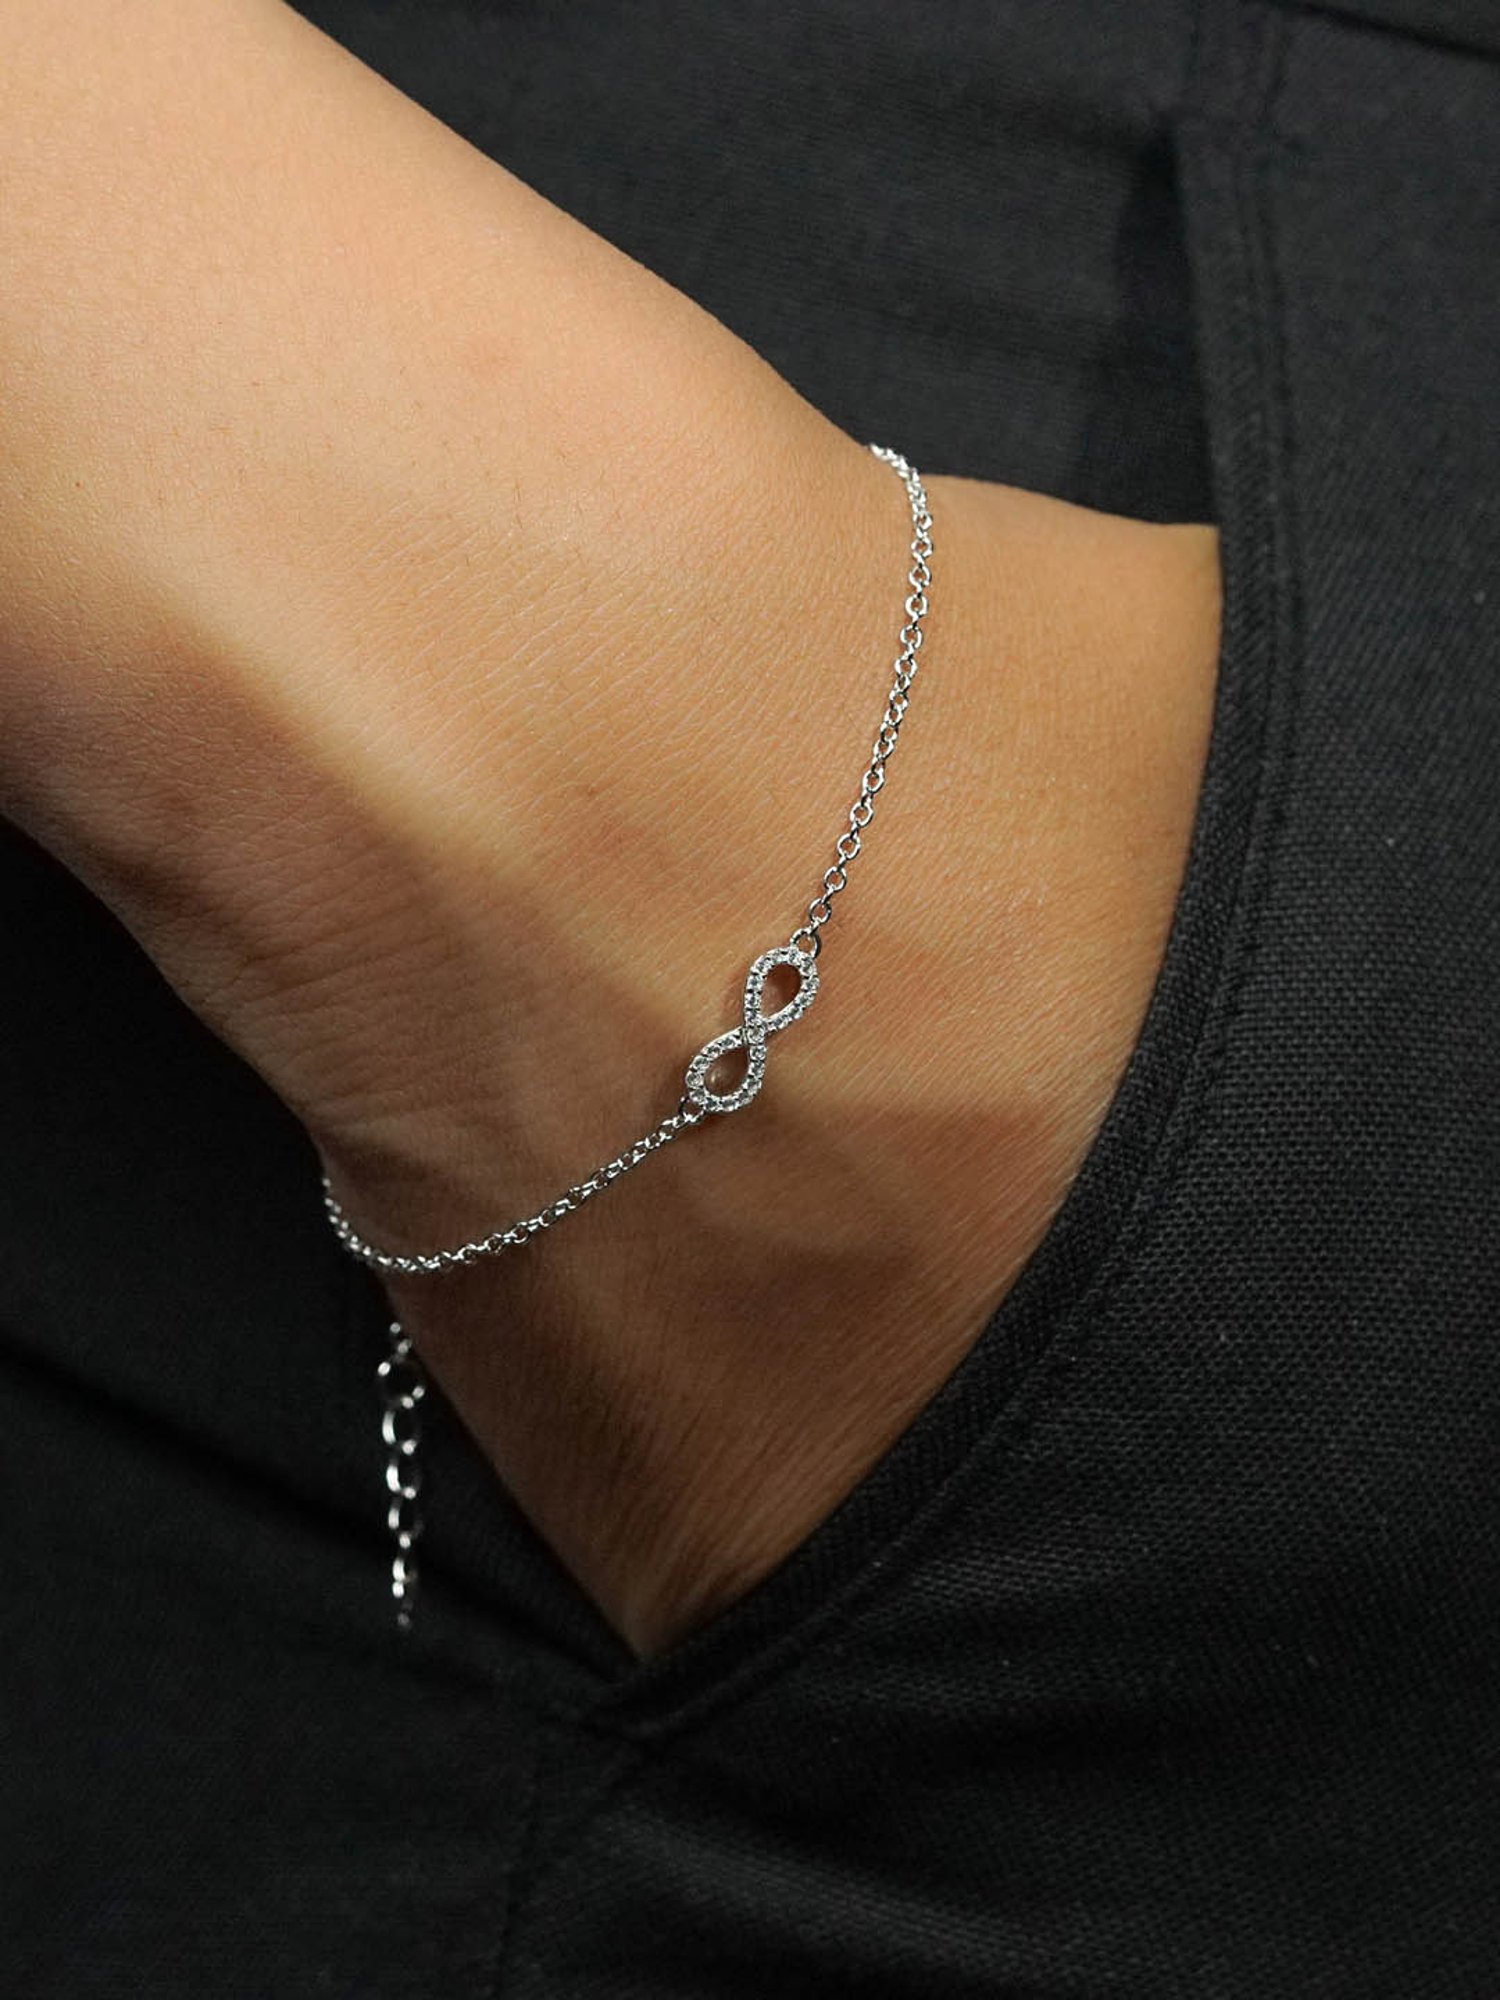 Buy Authentic Pandora Silver CHUNKY INFINITY KNOT Chain Bracelet  Online  in India  Etsy